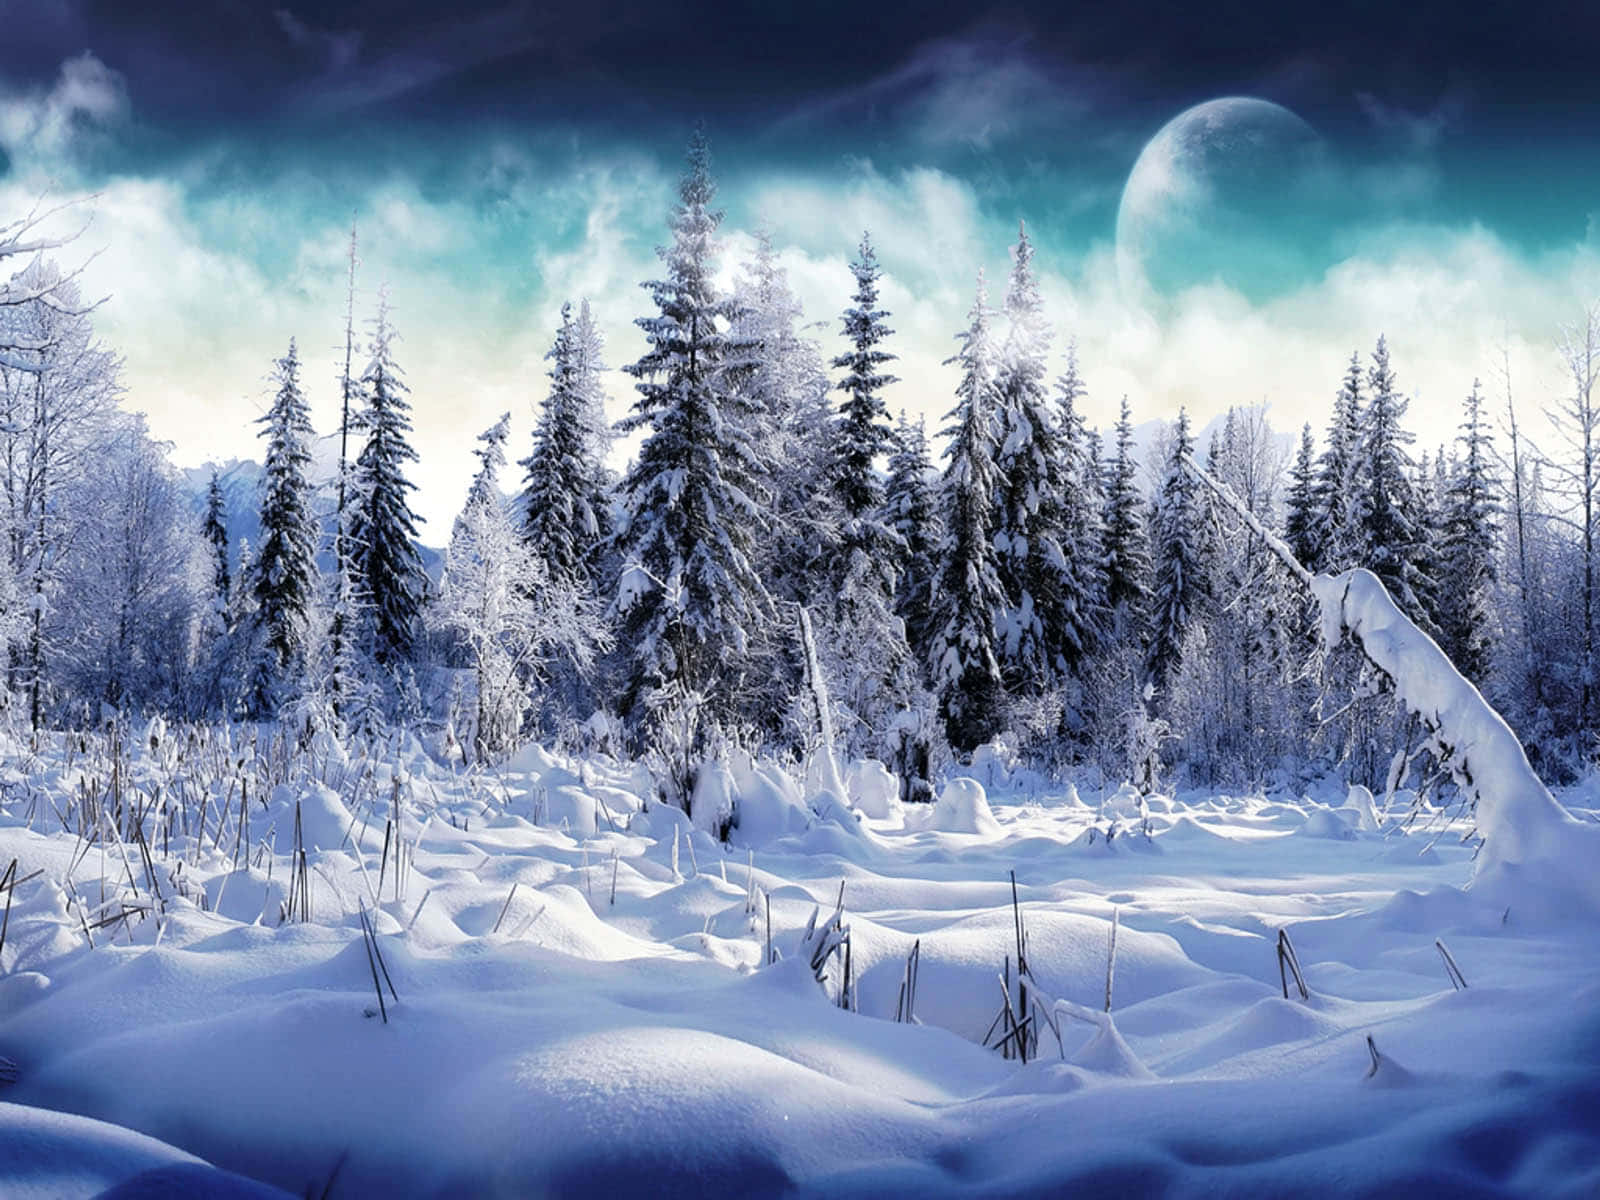 Snowy Forest In The Moonlight Background